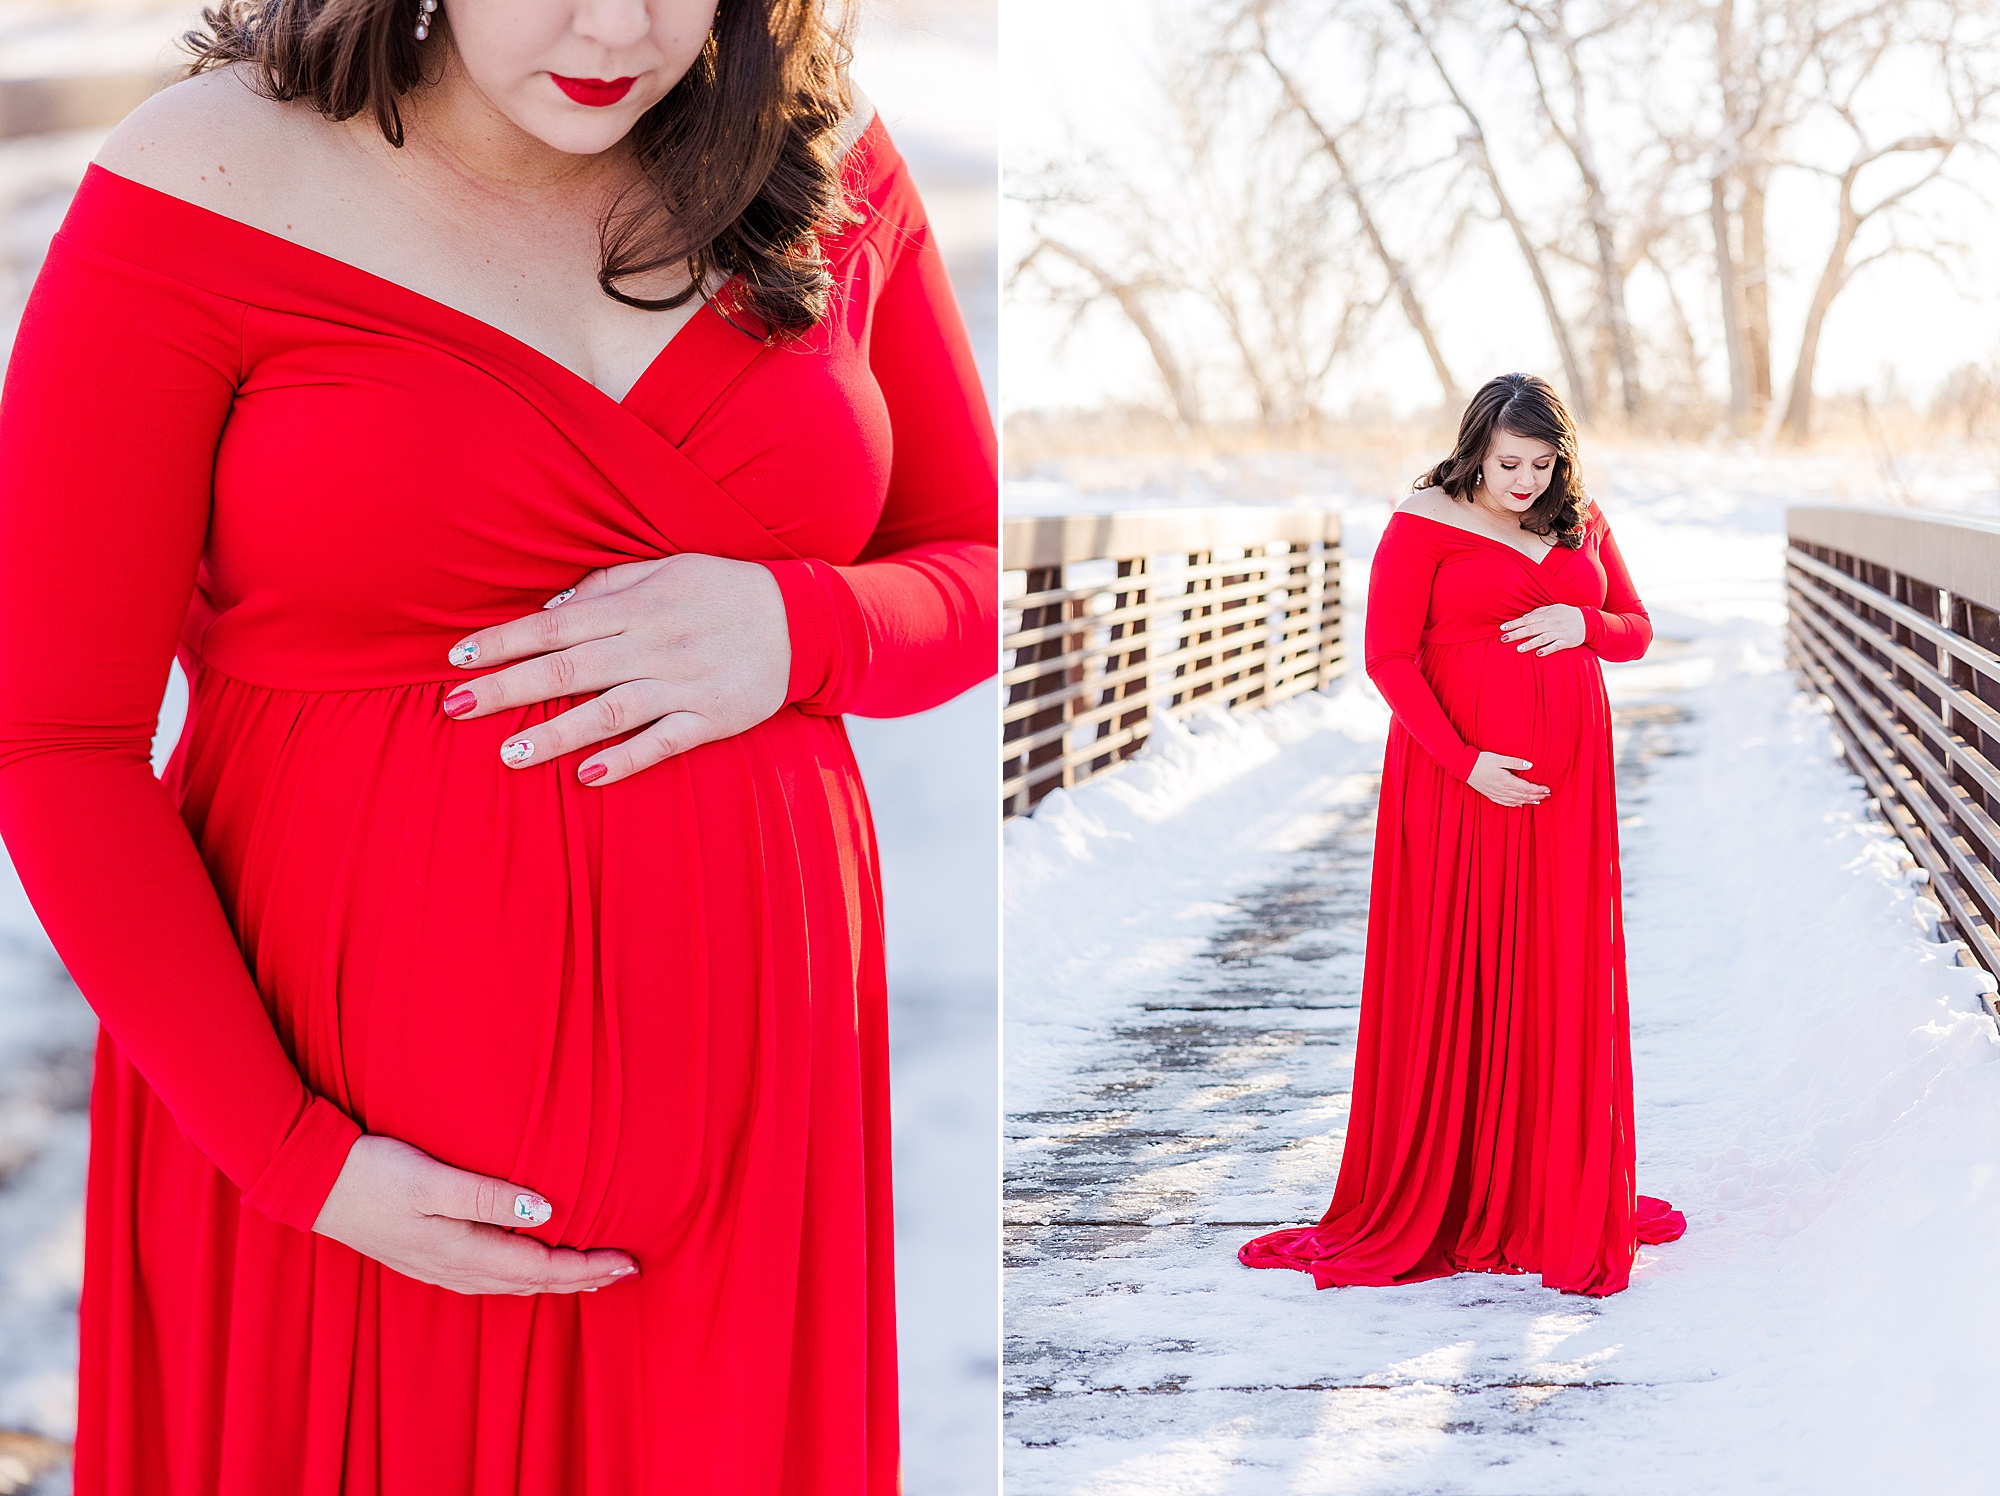 Longmont CO Maternity Photographer captures Winter Maternity session at Golden Ponds